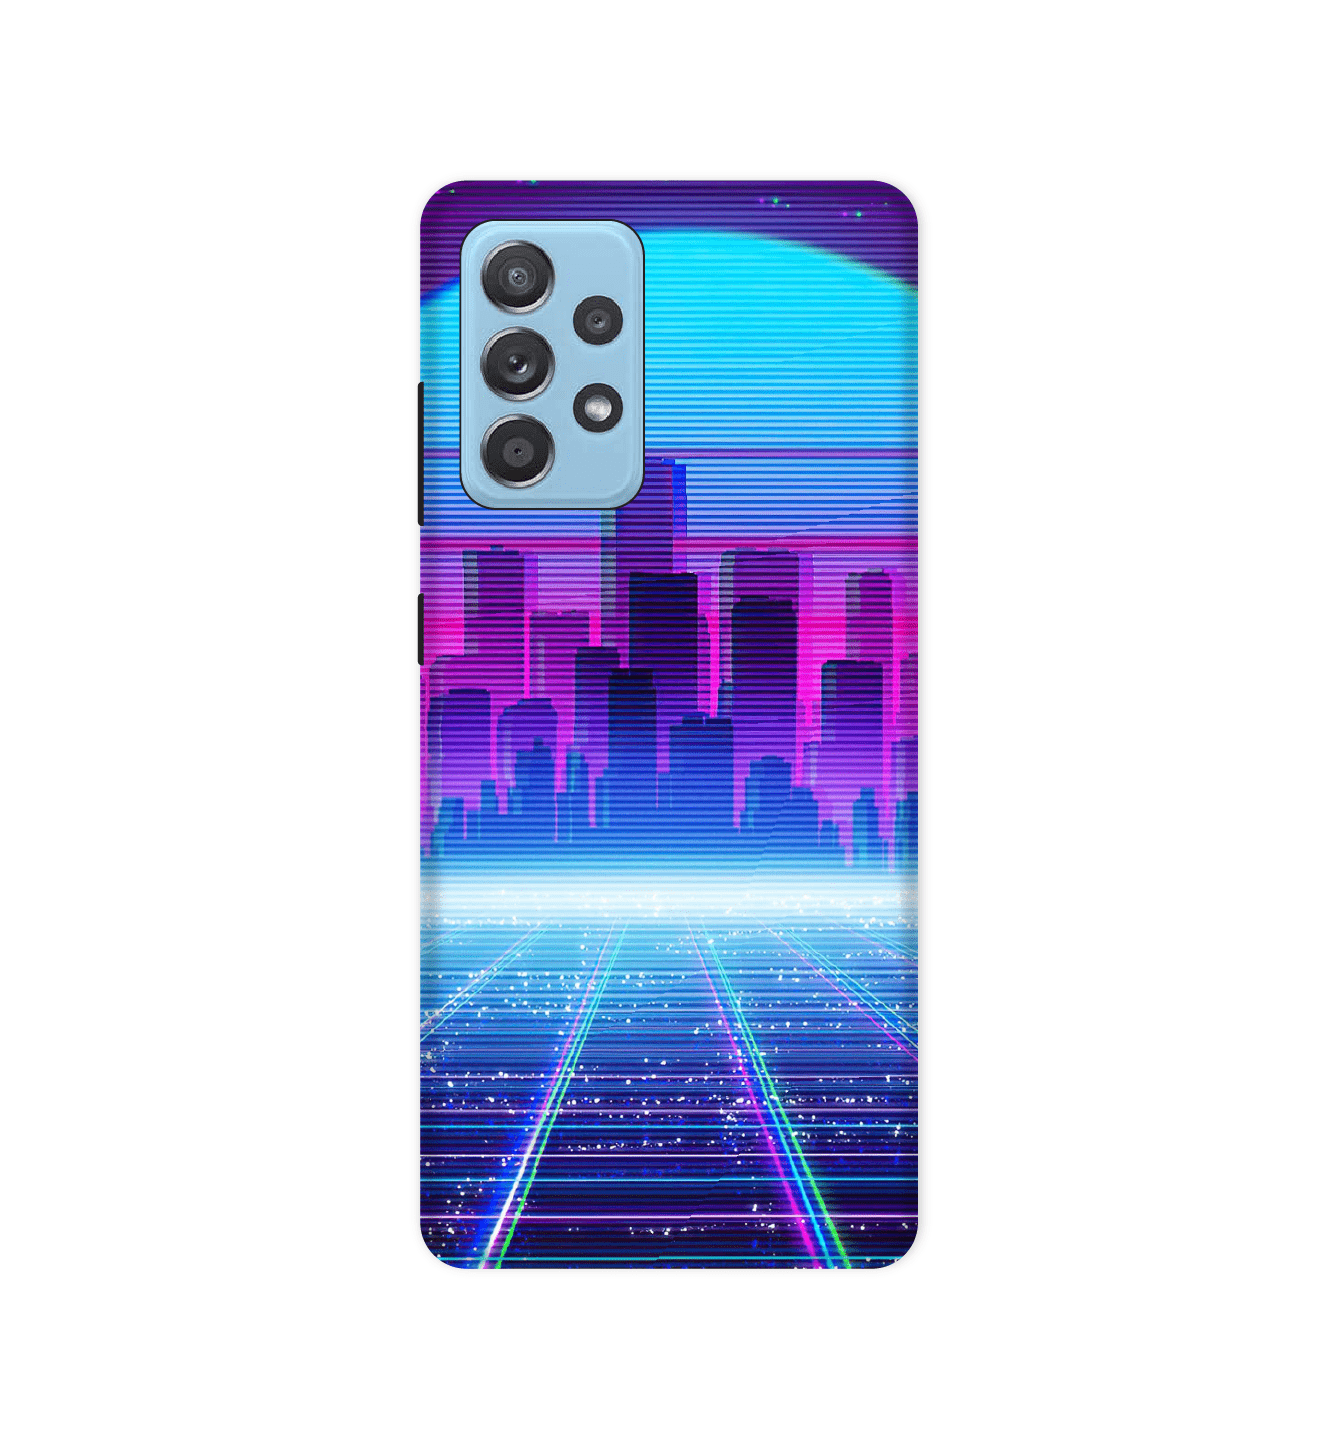 Cityscape Synthwave - Hard Cases For Samsung Models